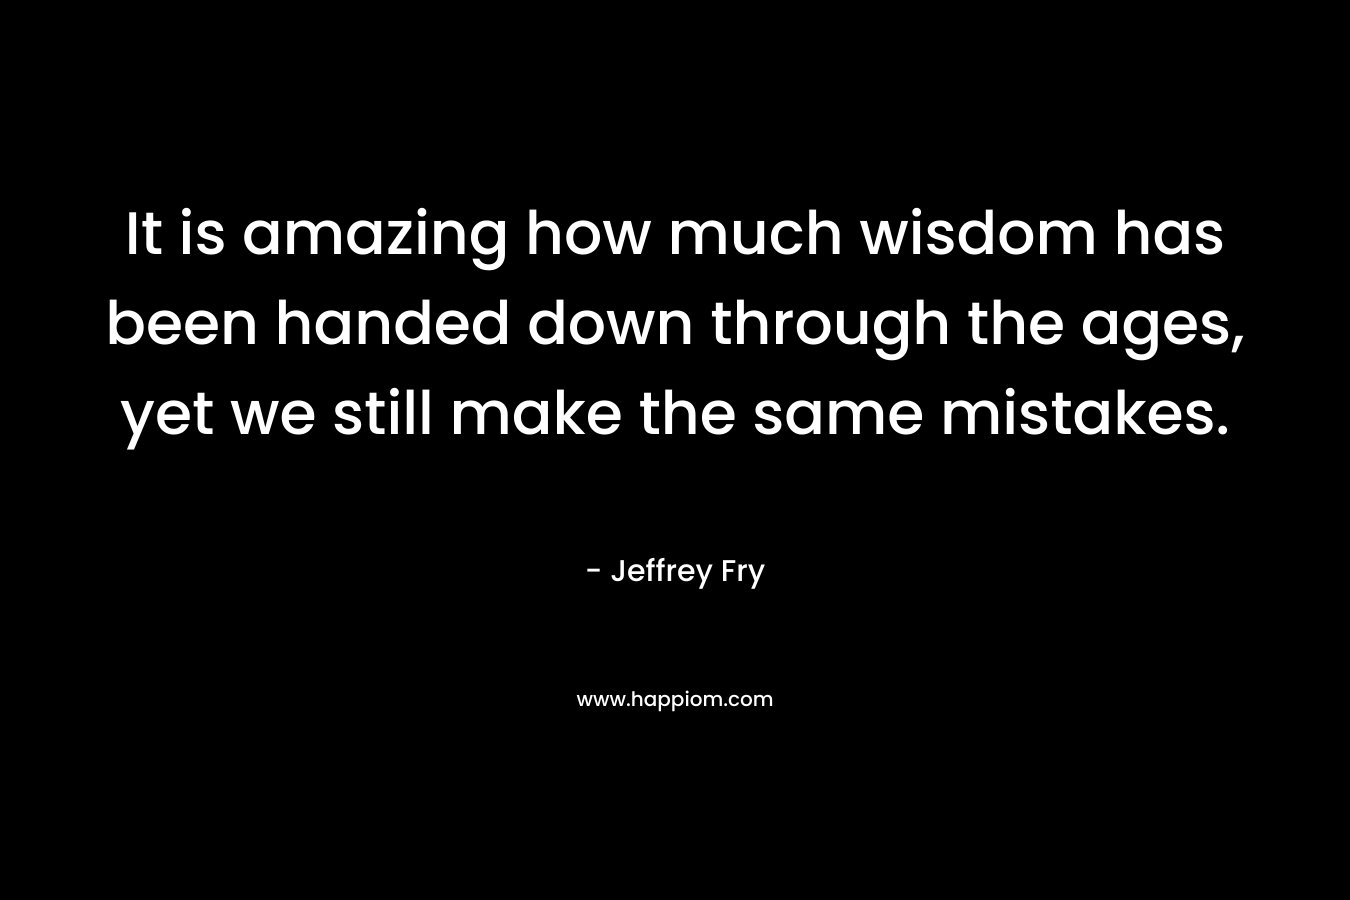 It is amazing how much wisdom has been handed down through the ages, yet we still make the same mistakes. – Jeffrey Fry